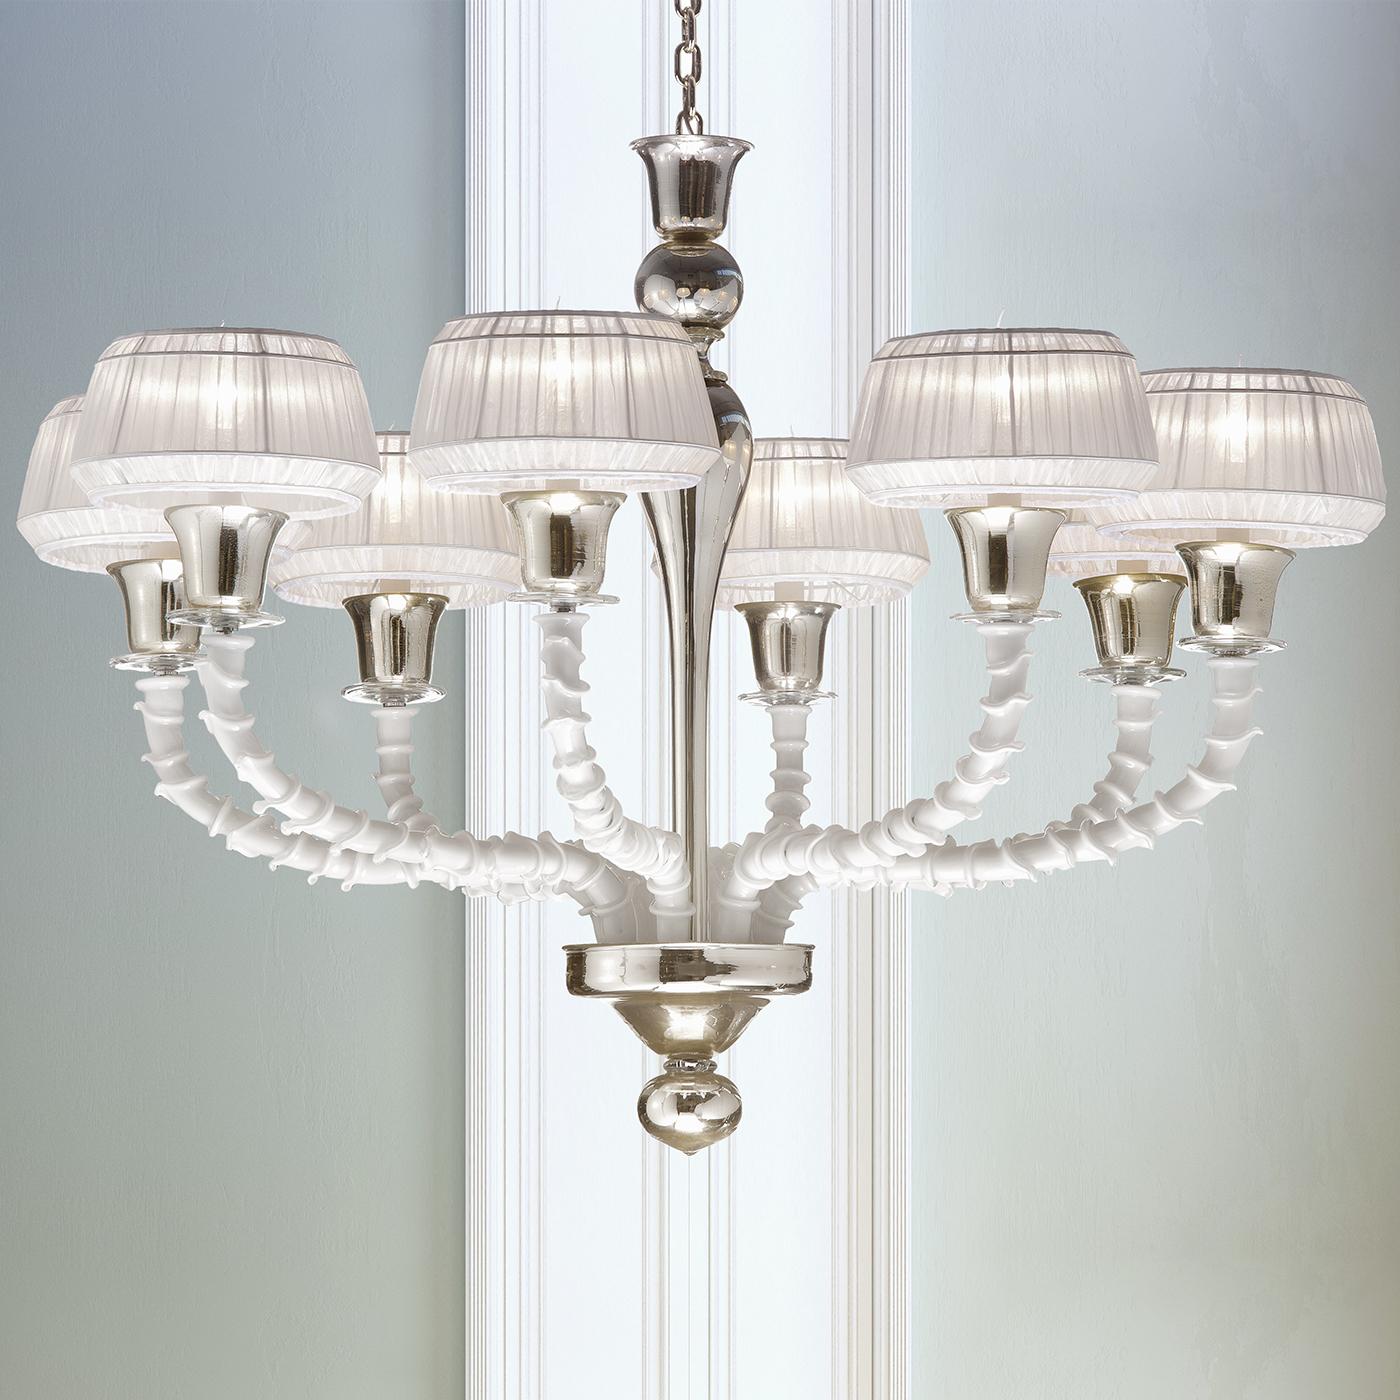 A superb mix of tradition and modernity, this magnificent chandelier combines the Rezzonico style of Venetian chandeliers with a contemporary twist. Handmade by skilled masters, Venetian mouth-blown glass is effortlessly blended in white with the